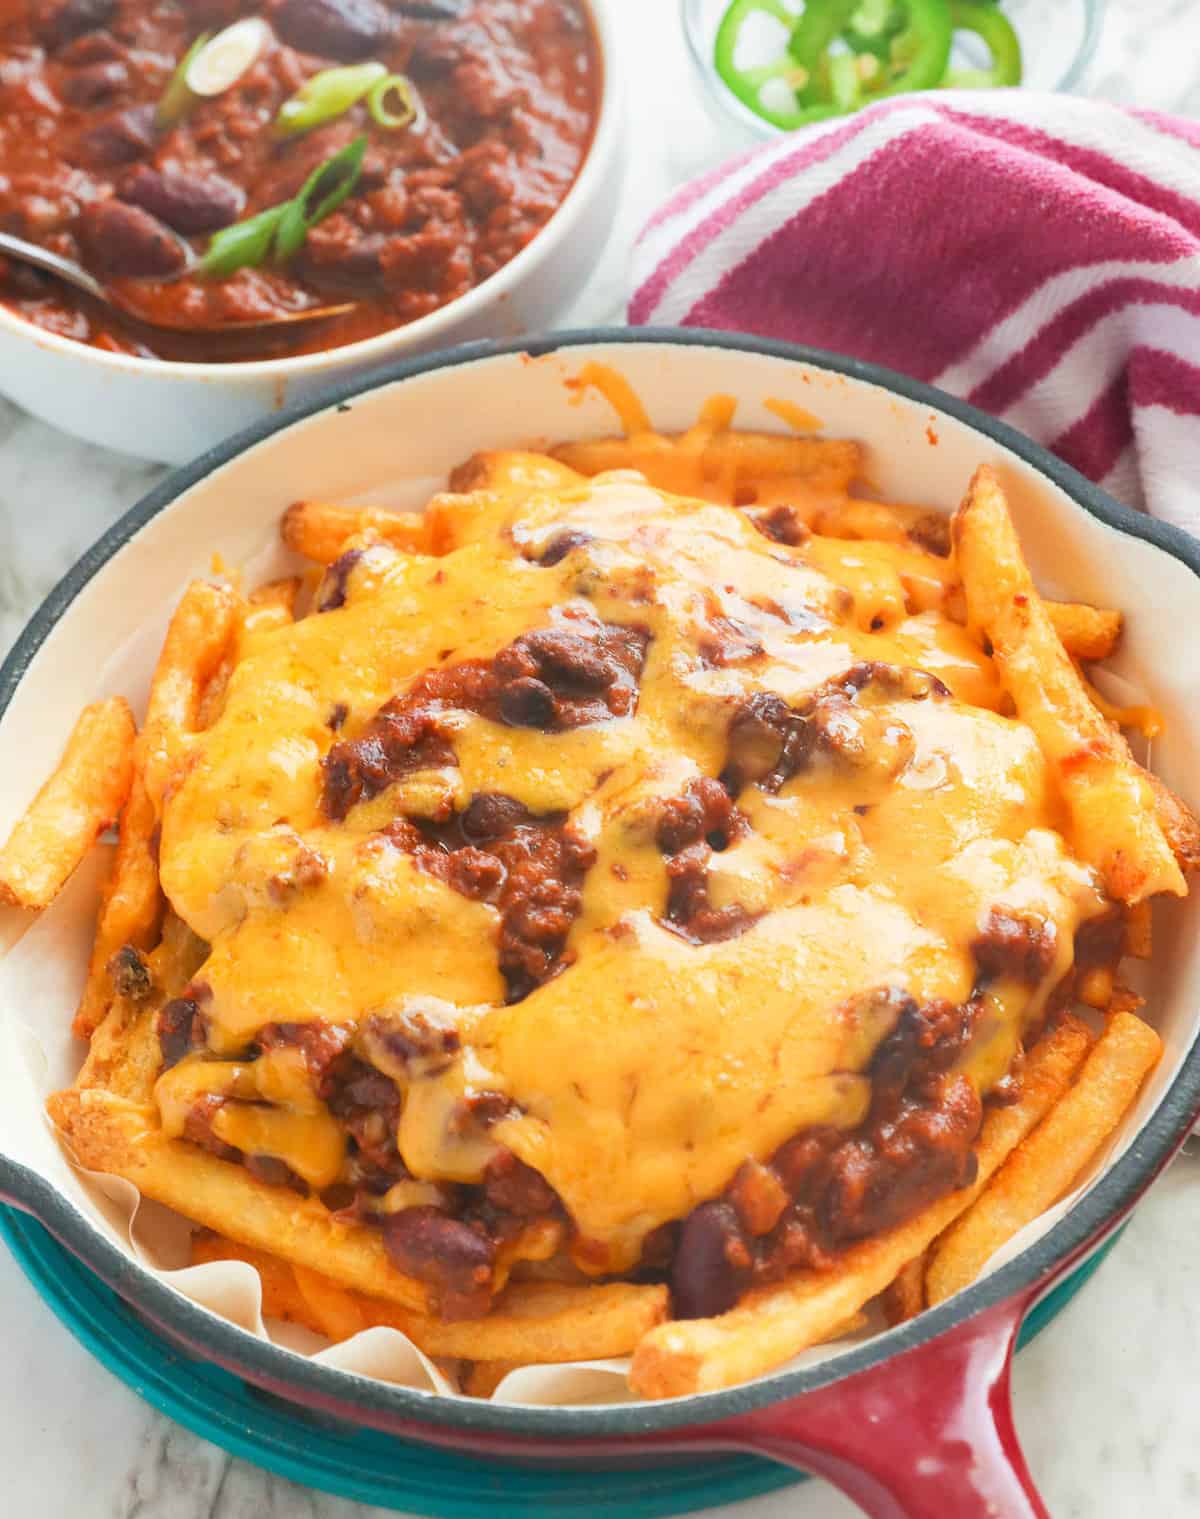 A skillet full of crazy delicious chili cheese fries